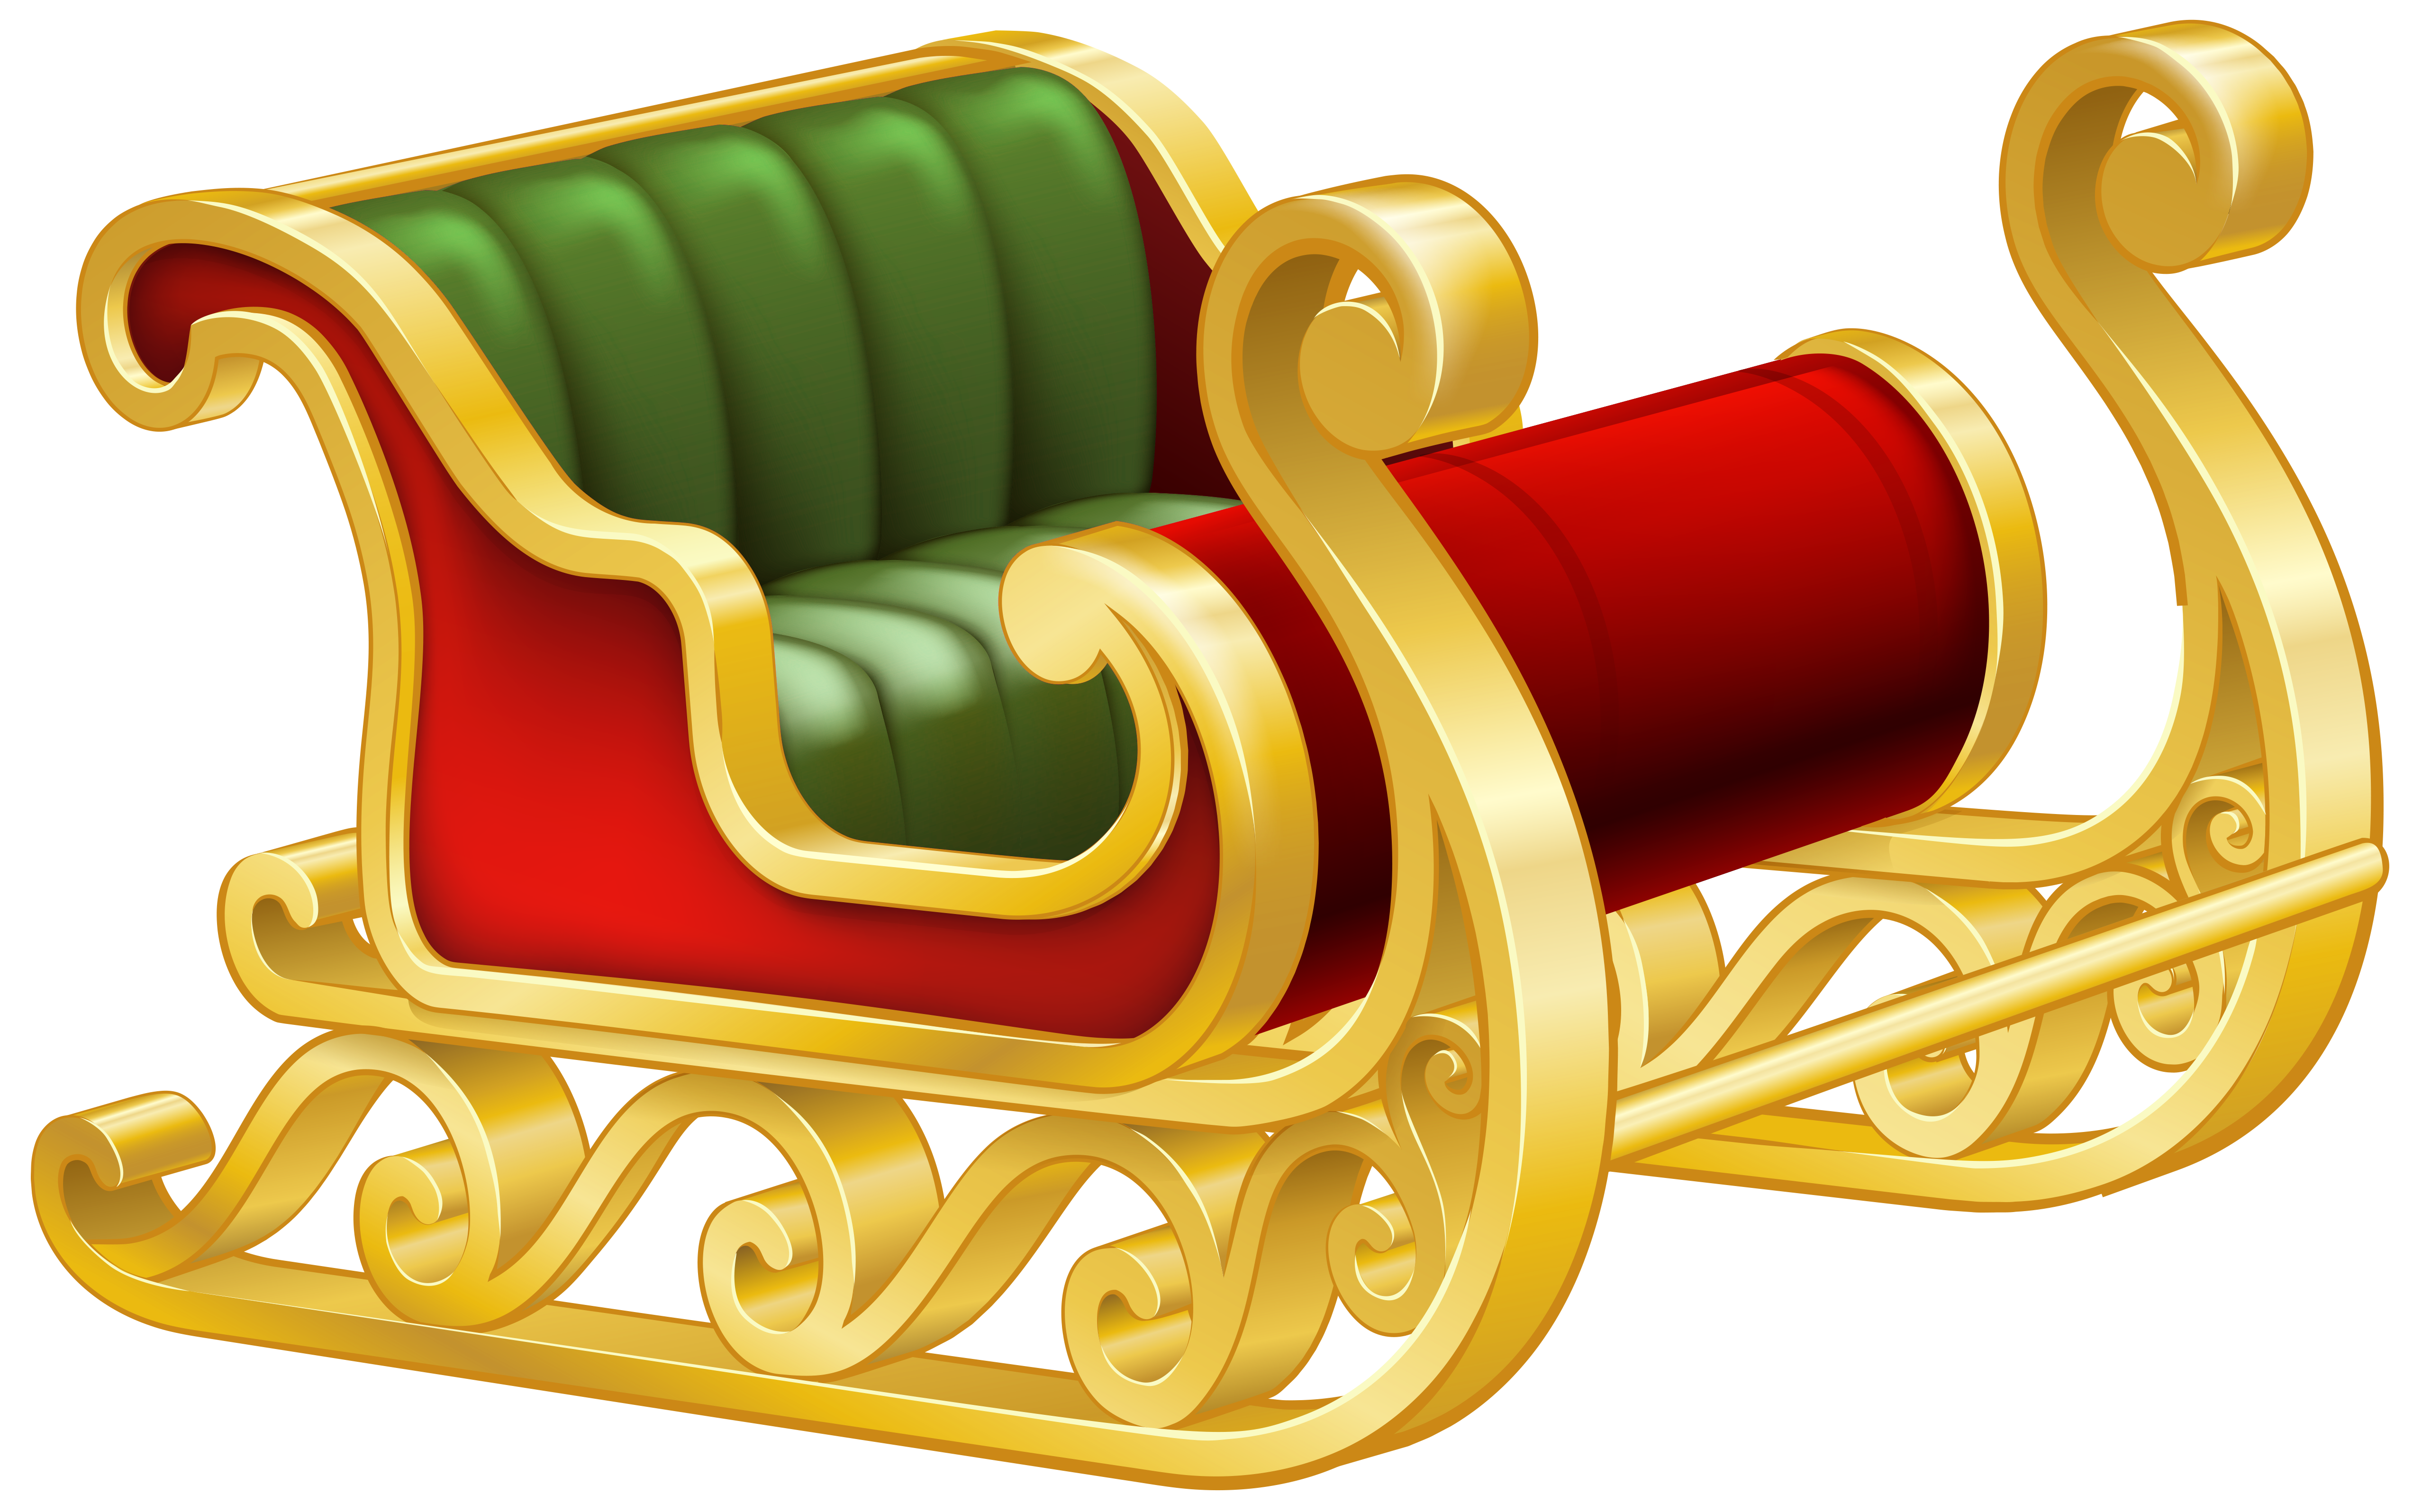 Red Sleigh PNG Clip Art Image